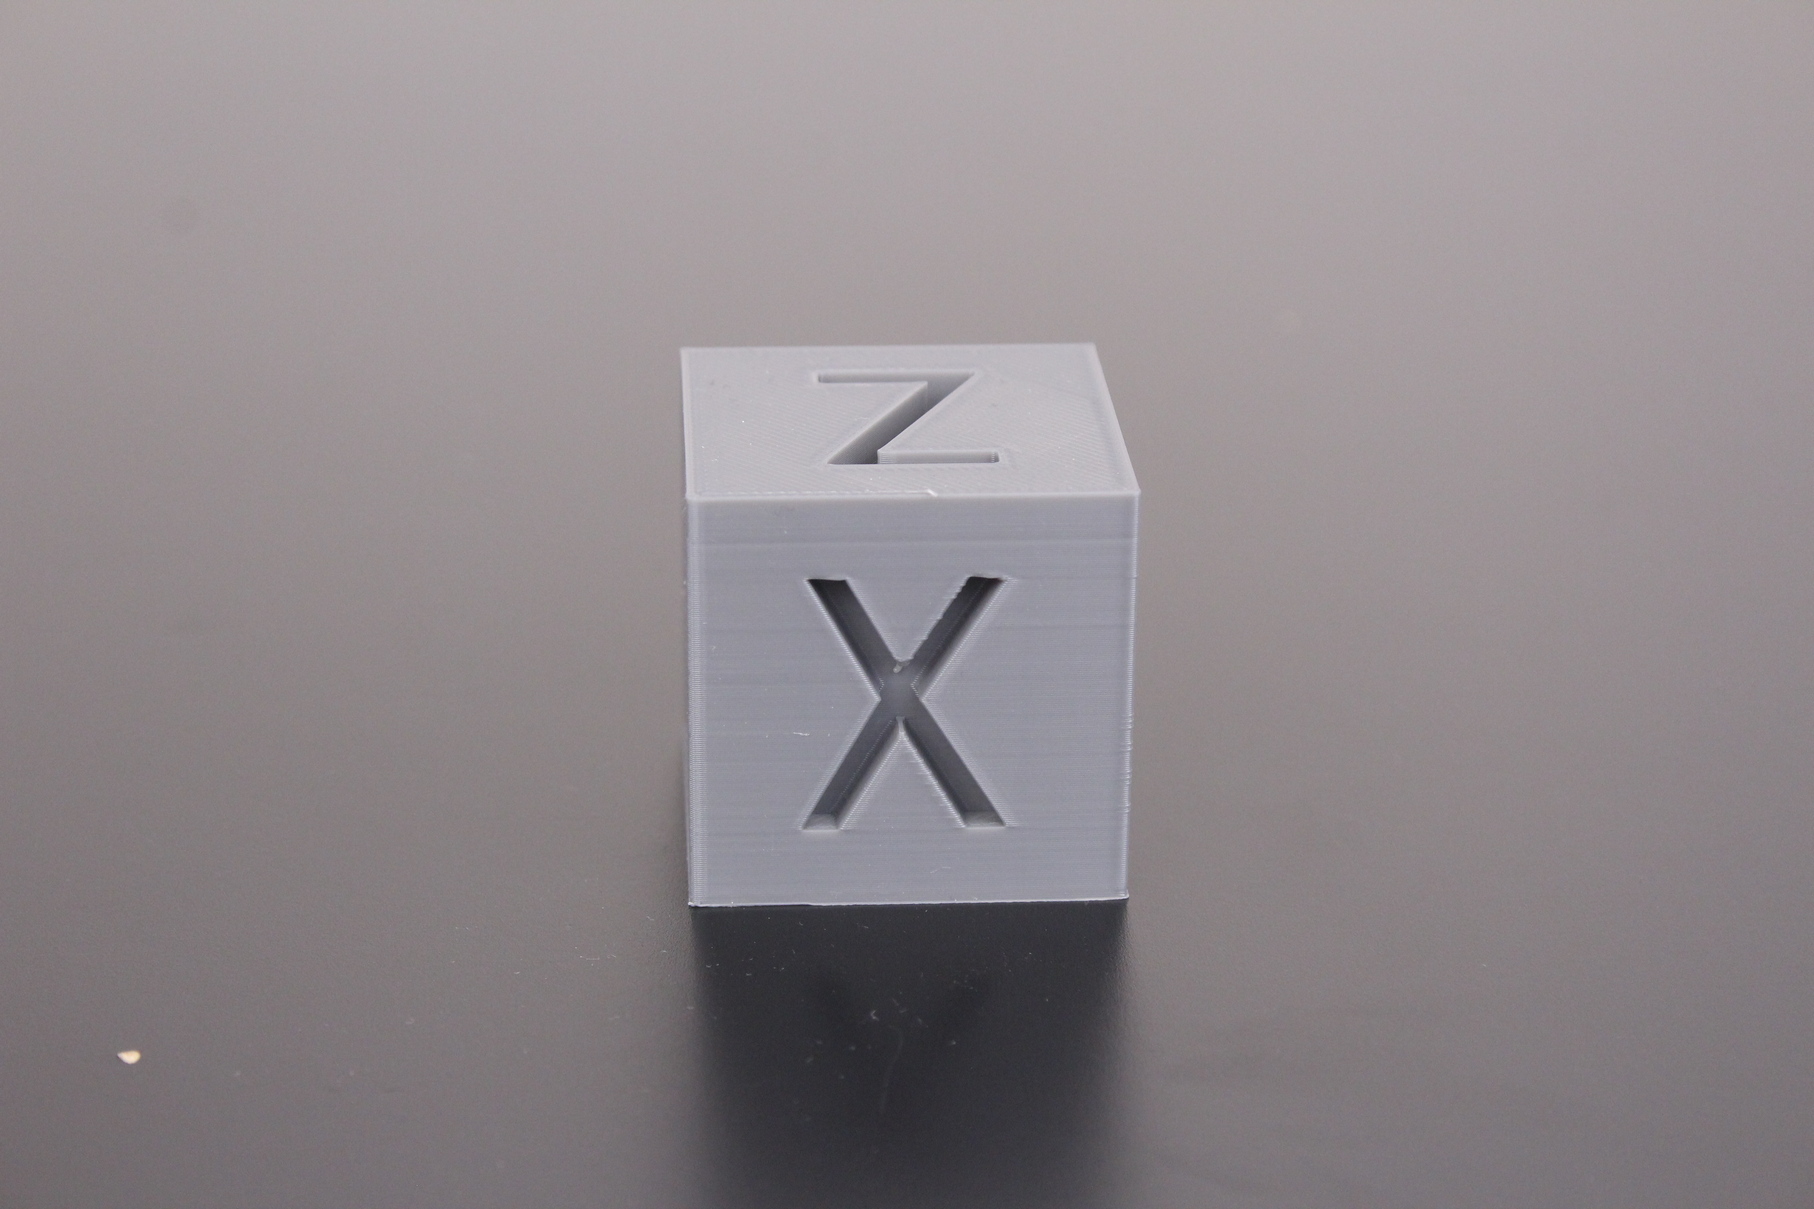 200 percent Calibration Cube printed on Voxelab Aries 1 | Voxelab Aries Review: A Worthy Upgrade for the Aquila?